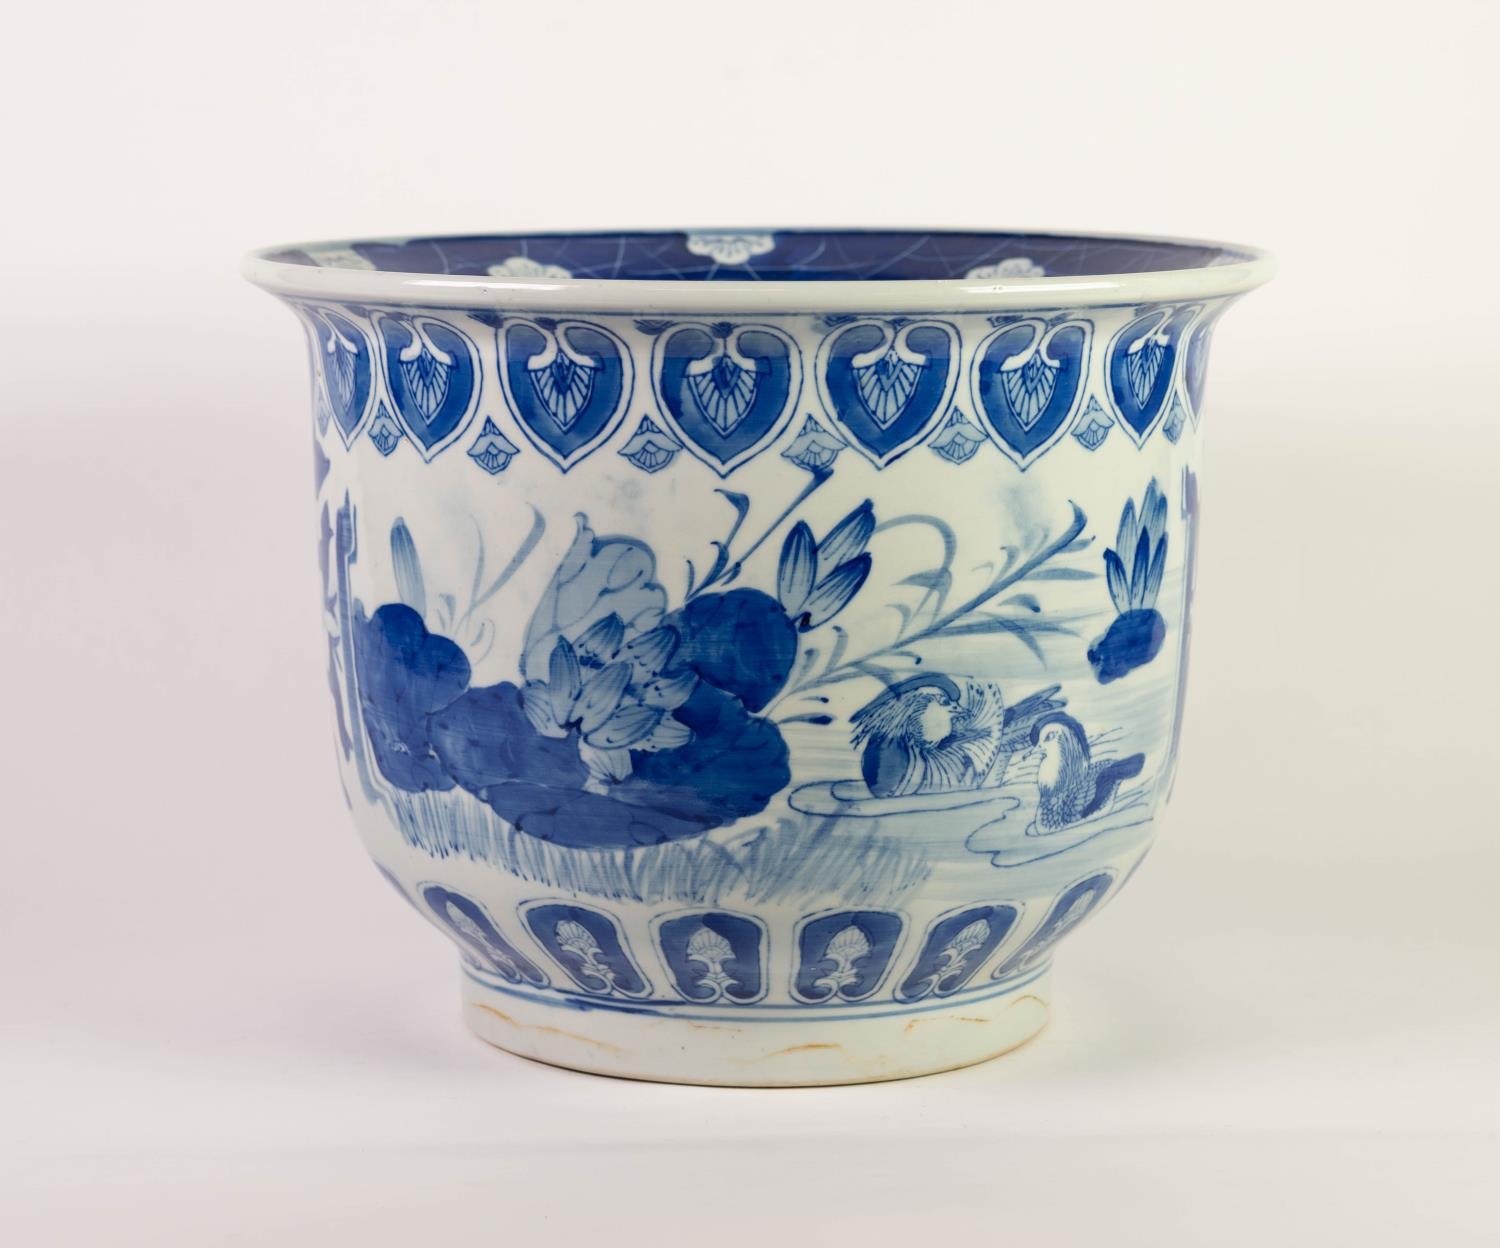 TWENTIETH CENTURY ORIENTAL BLUE AND WHITE PORCELAIN JARDINIÈRE, outlined and washed with ducks and